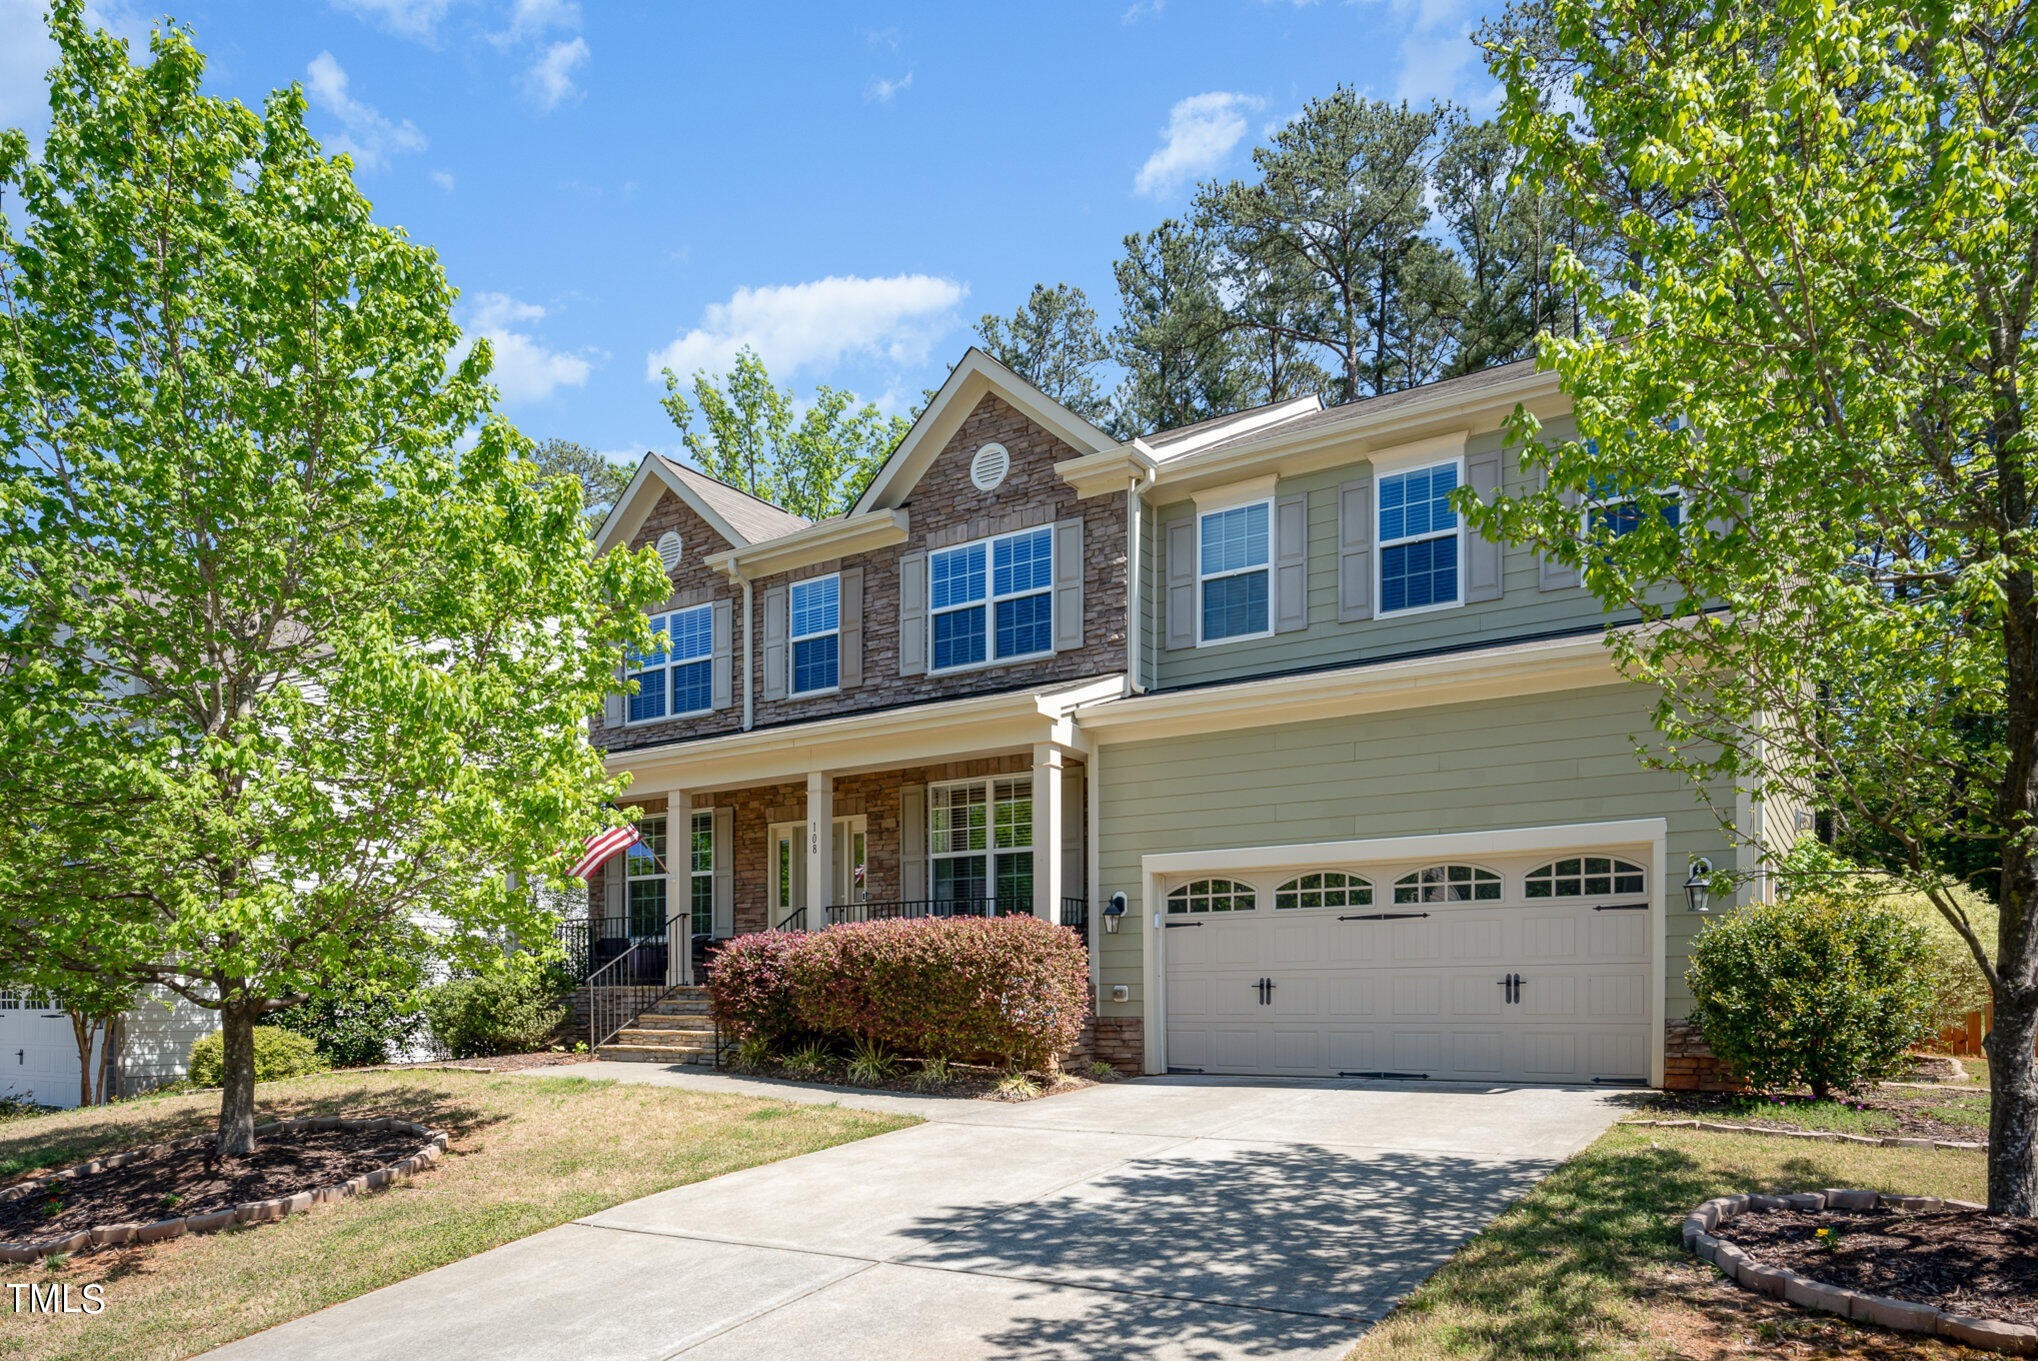 3. 108 Ulverston Drive, Holly Springs Nc 27540